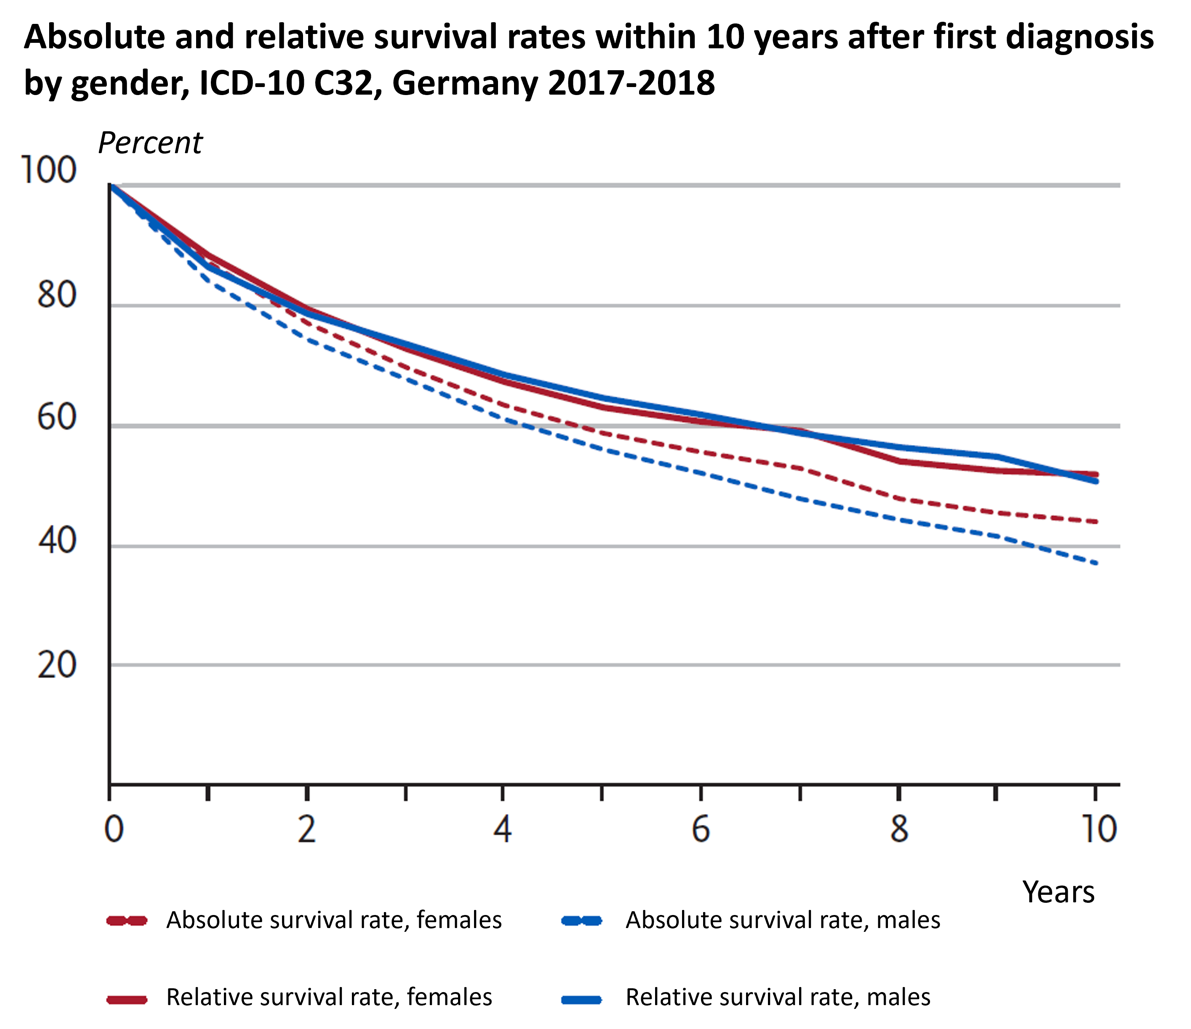 Laryngeal carcinoma in Germany: absolute and relative survival within 10 years after diagnosis, by gender